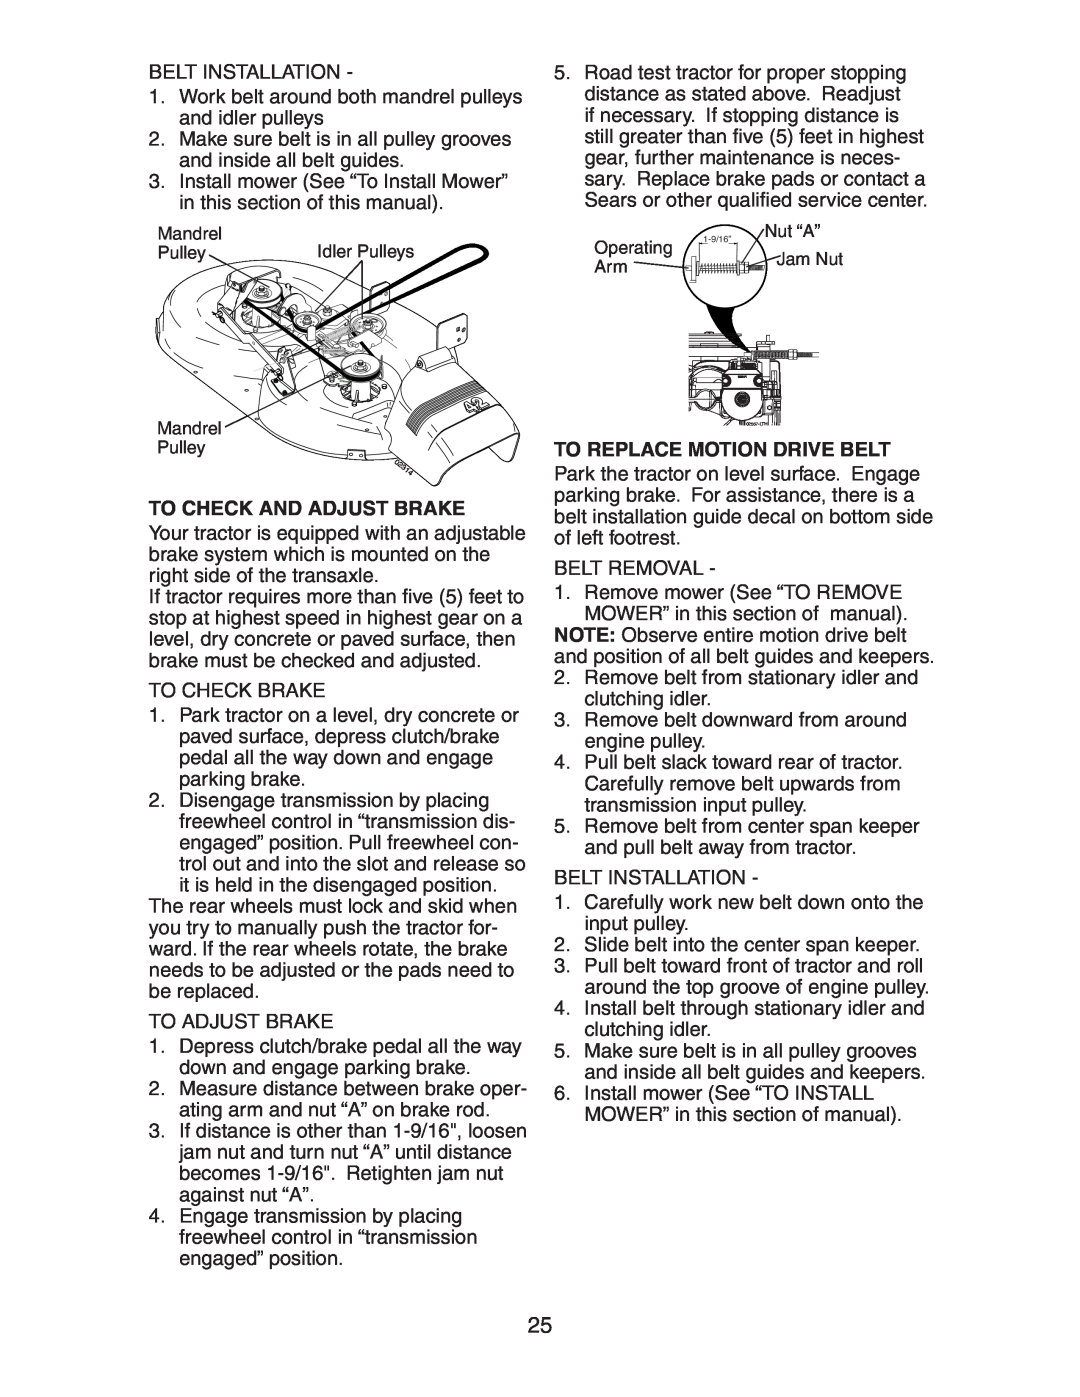 Craftsman 917.27582 owner manual To Check And Adjust Brake, To Replace Motion Drive Belt, Idler Pulleys 